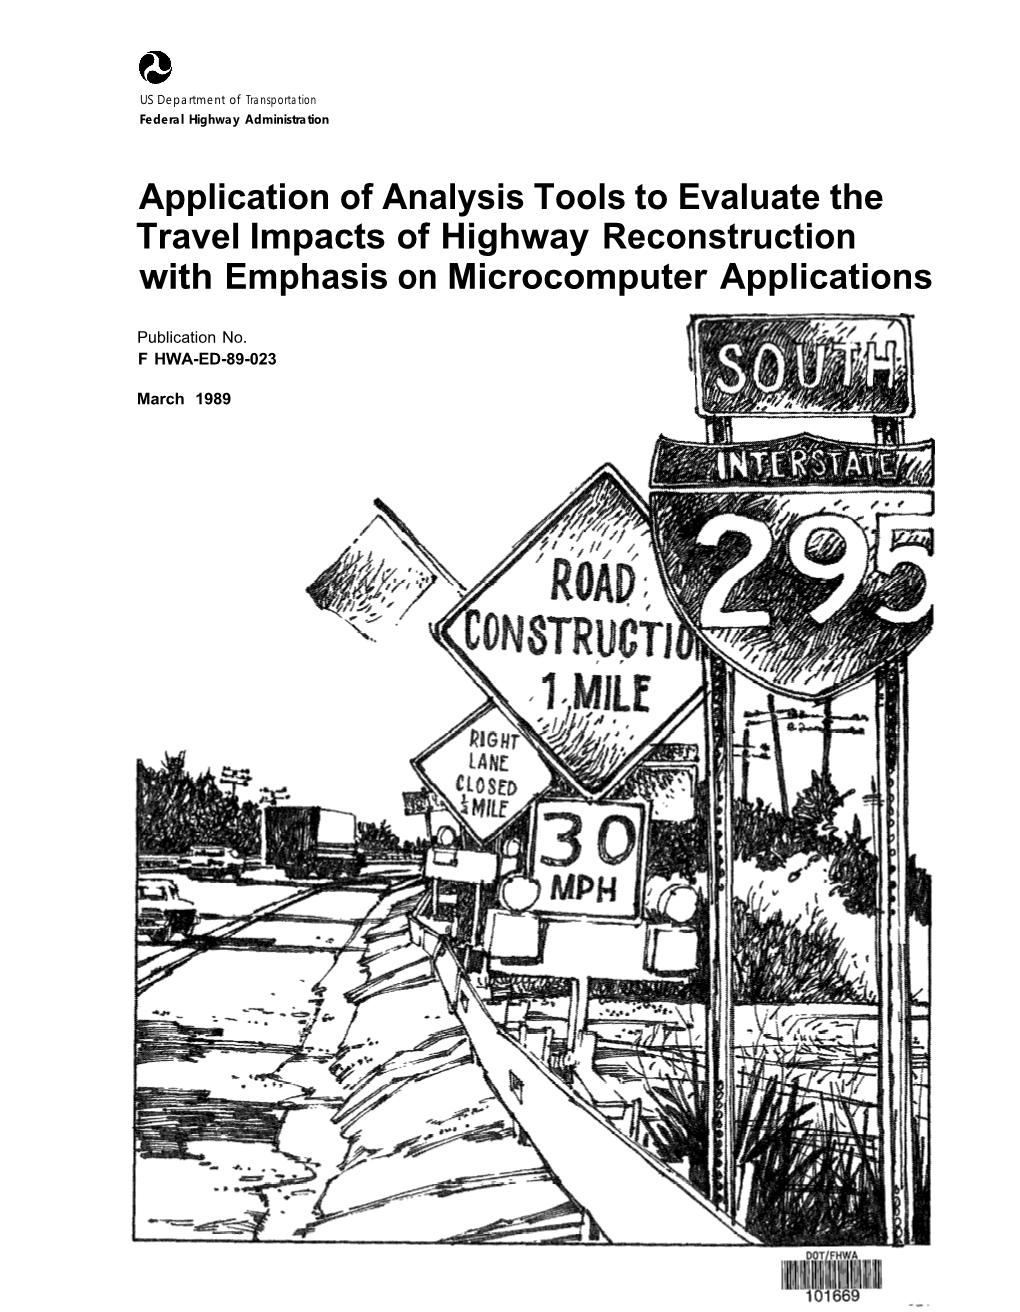 Application of Analysis Tools to Evaluate the Travel Impacts of Highway Reconstruction with Emphasis on Microcomputer Applications